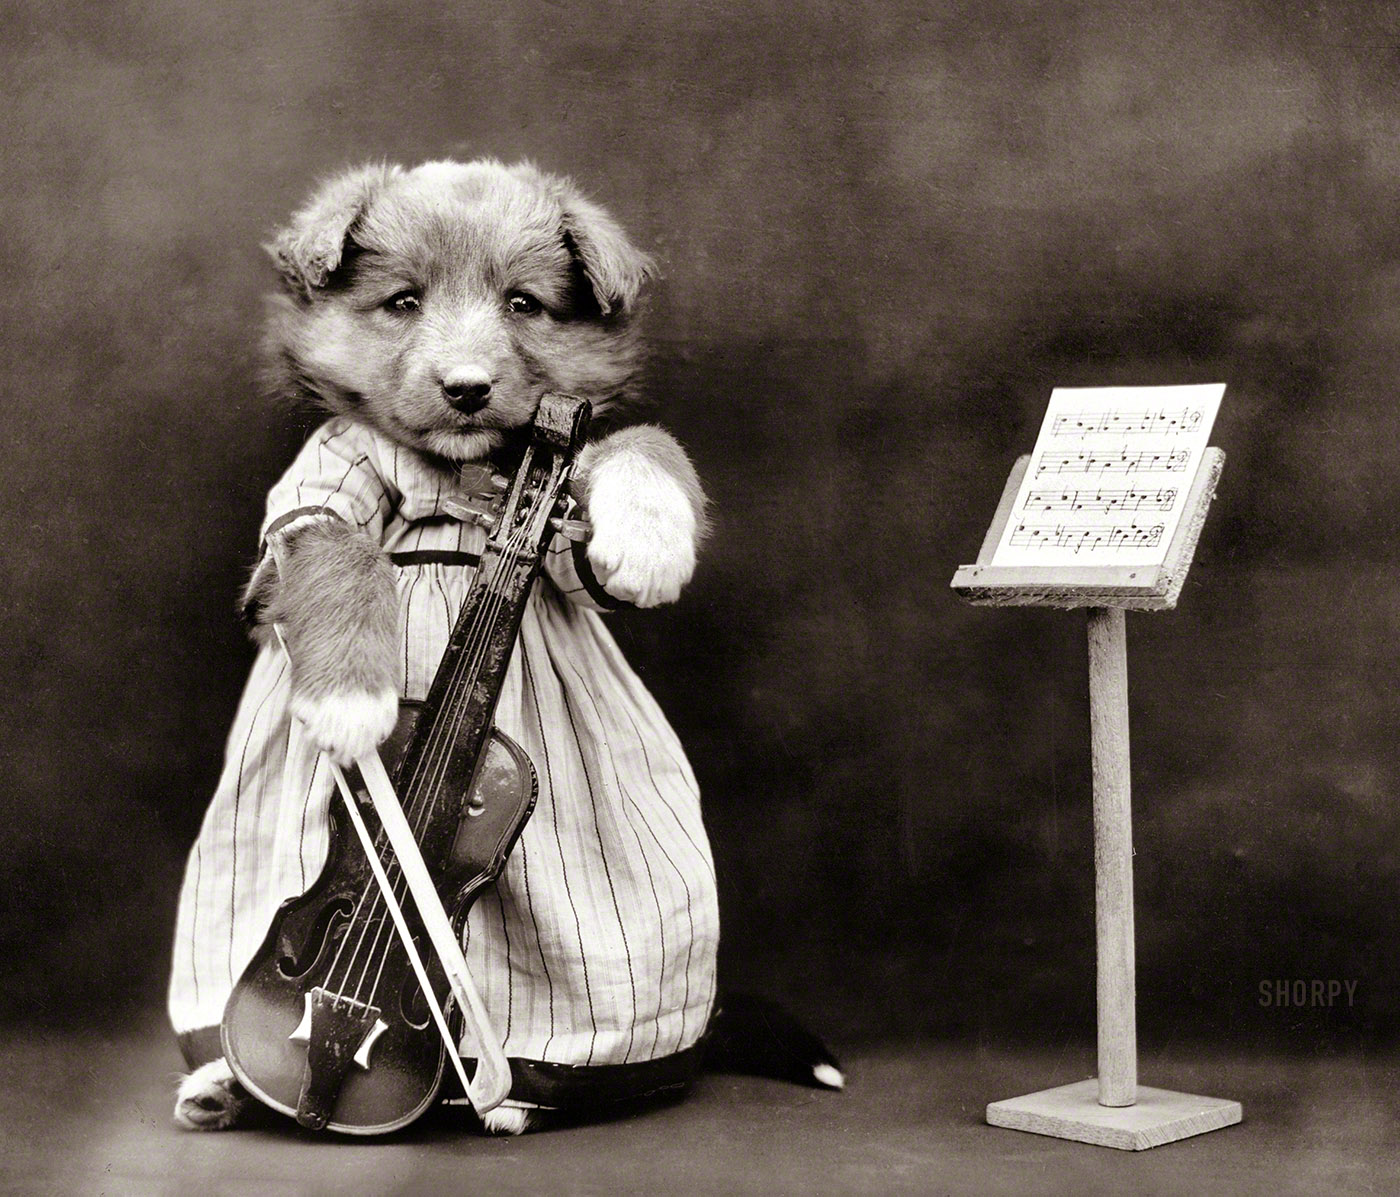 1914. "Dog wearing dress, posed with miniature violin and sheet music on stand." Playing the Inverted Waltz. Photo by Harry Whittier Frees. View full size.